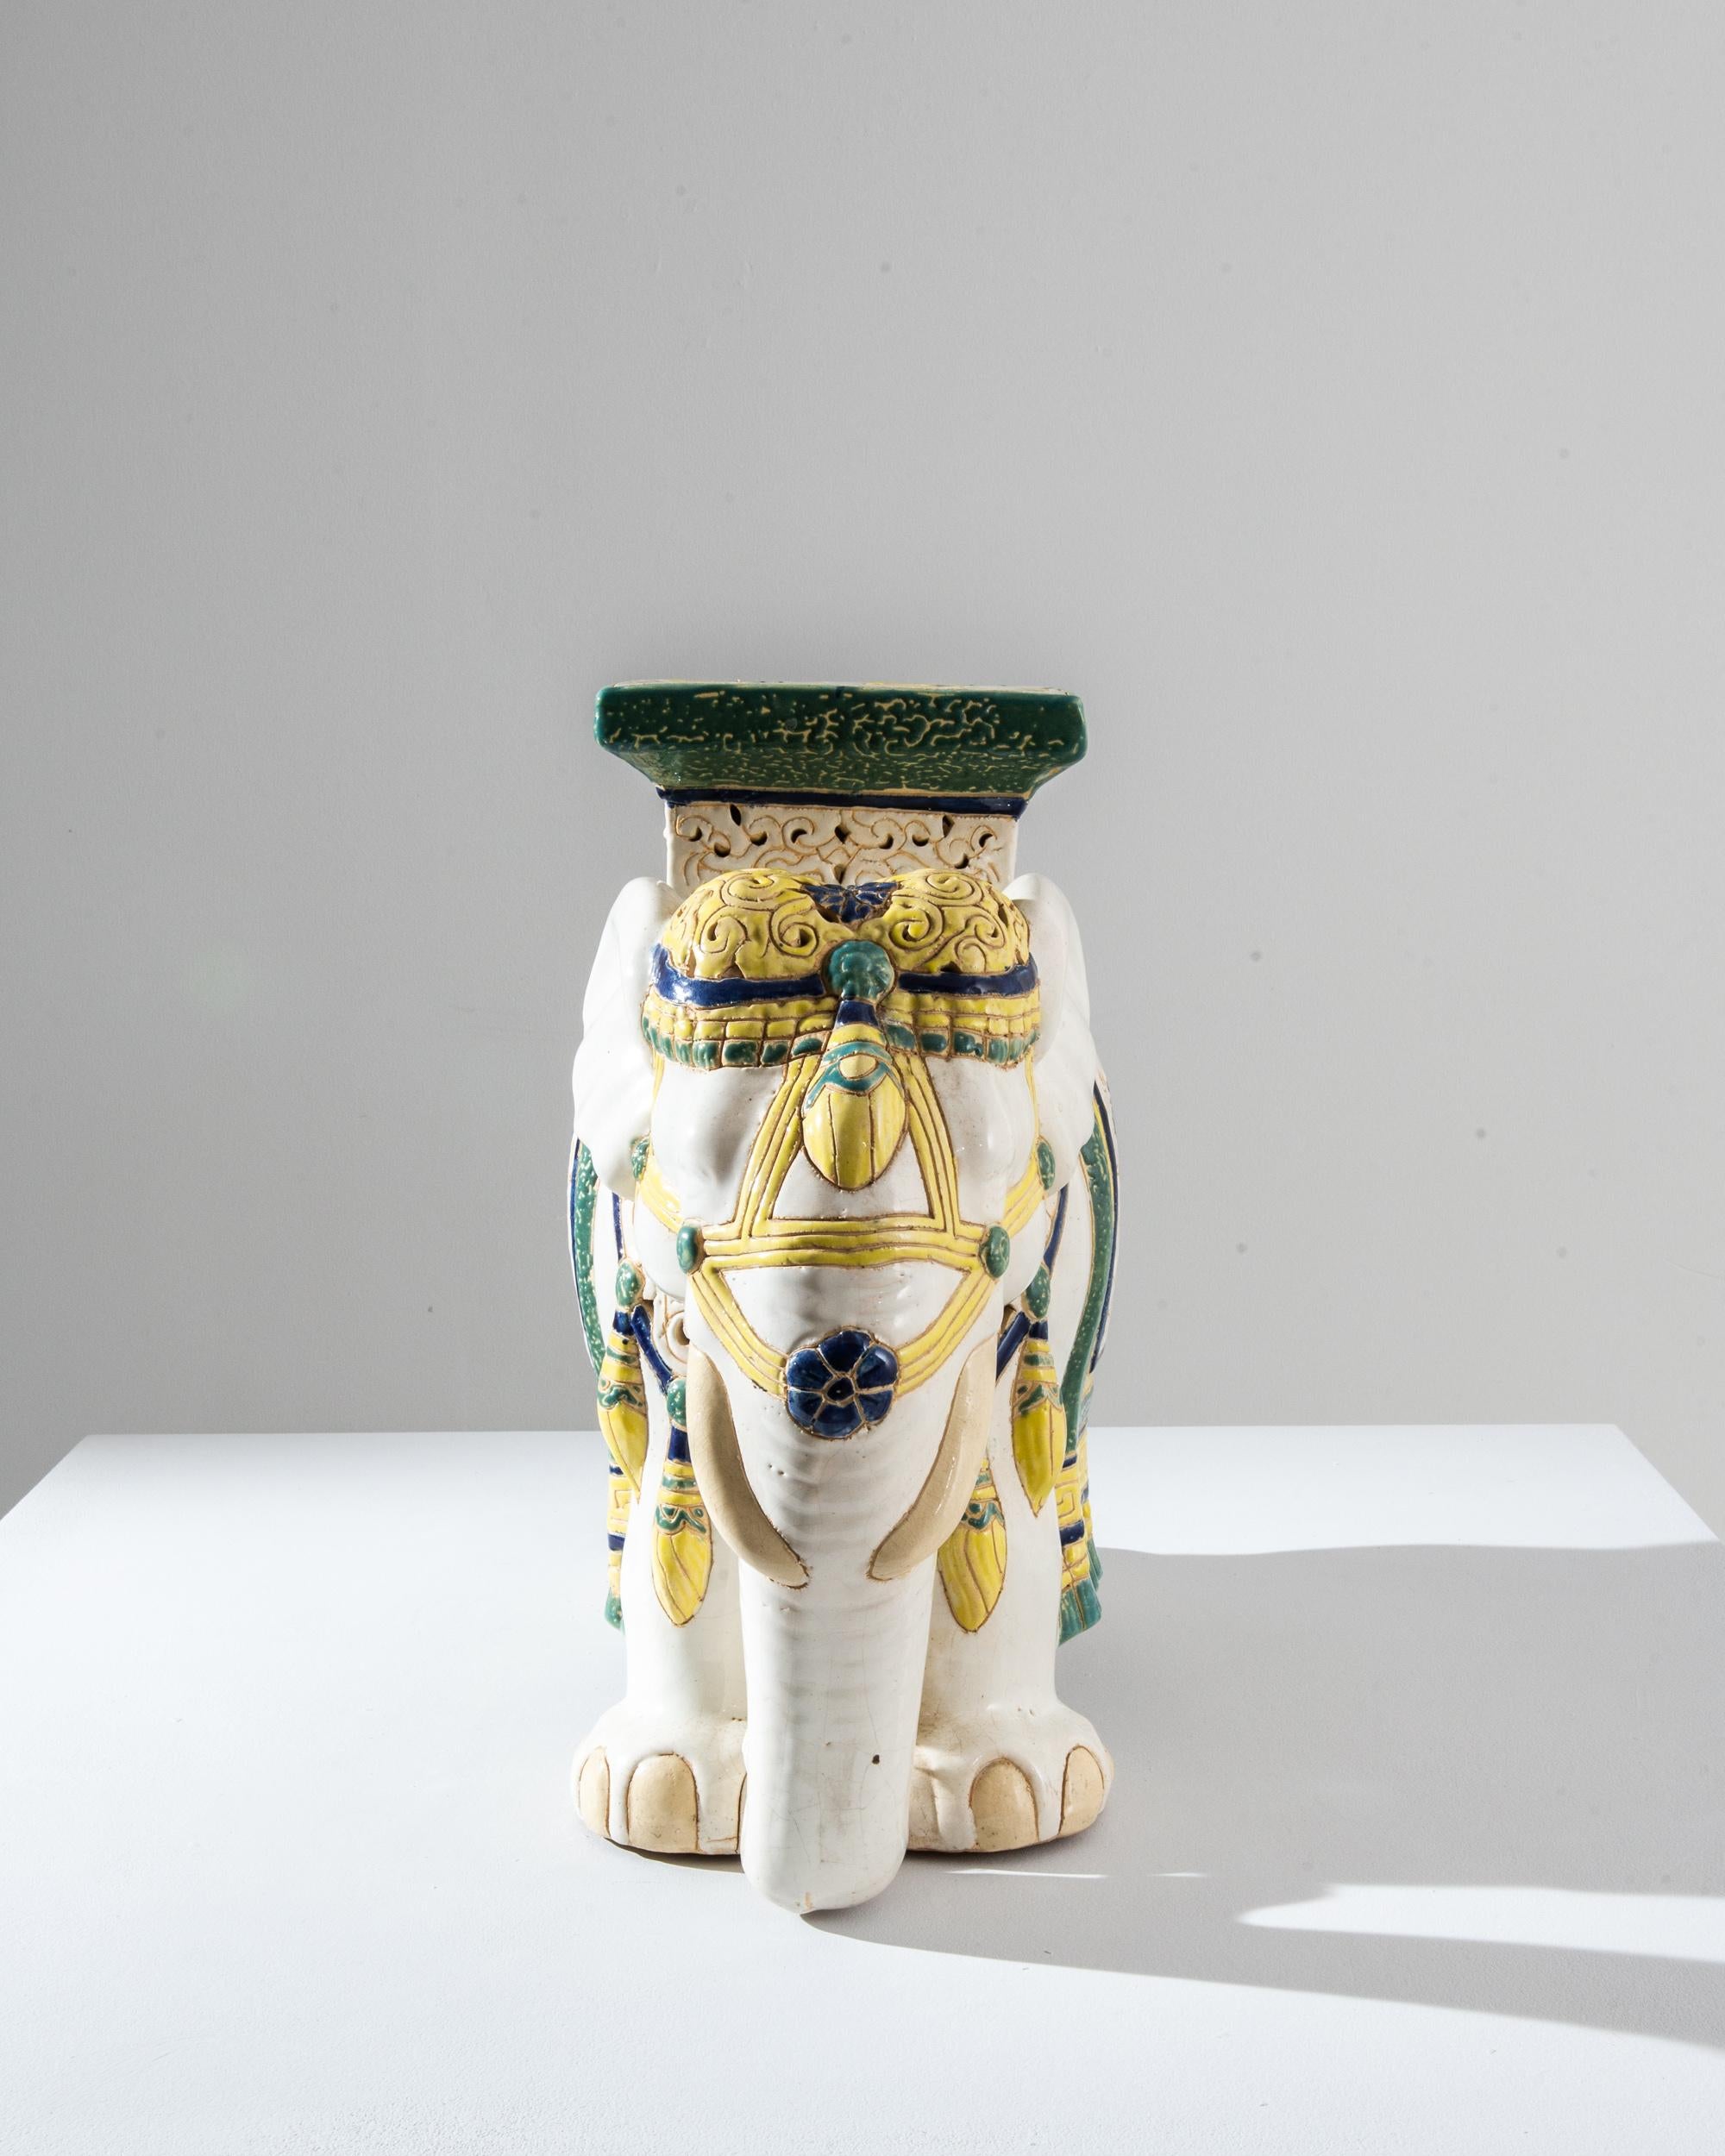 A ceramic decoration from 1960s France in the shape of an elephant. Glazed in bright white laced with powder blue and sunny yellow; the saddle, seat and blanket are delicately patterned — reflecting Chinese and Arabic influences — suggesting the